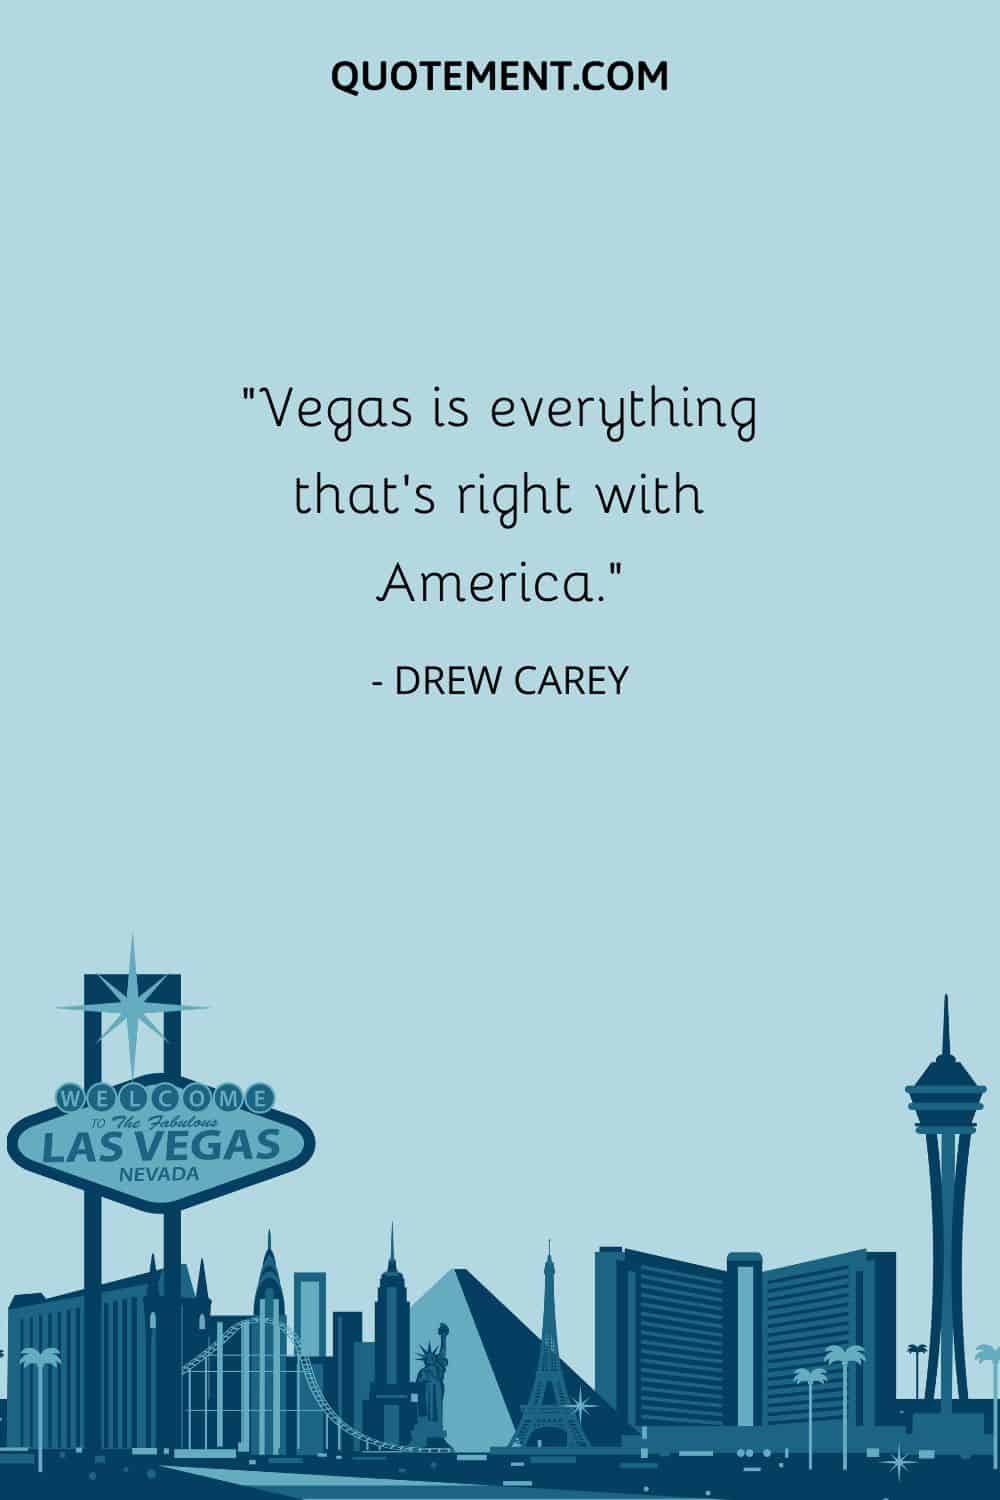 “Vegas is everything that’s right with America.” — Drew Carey